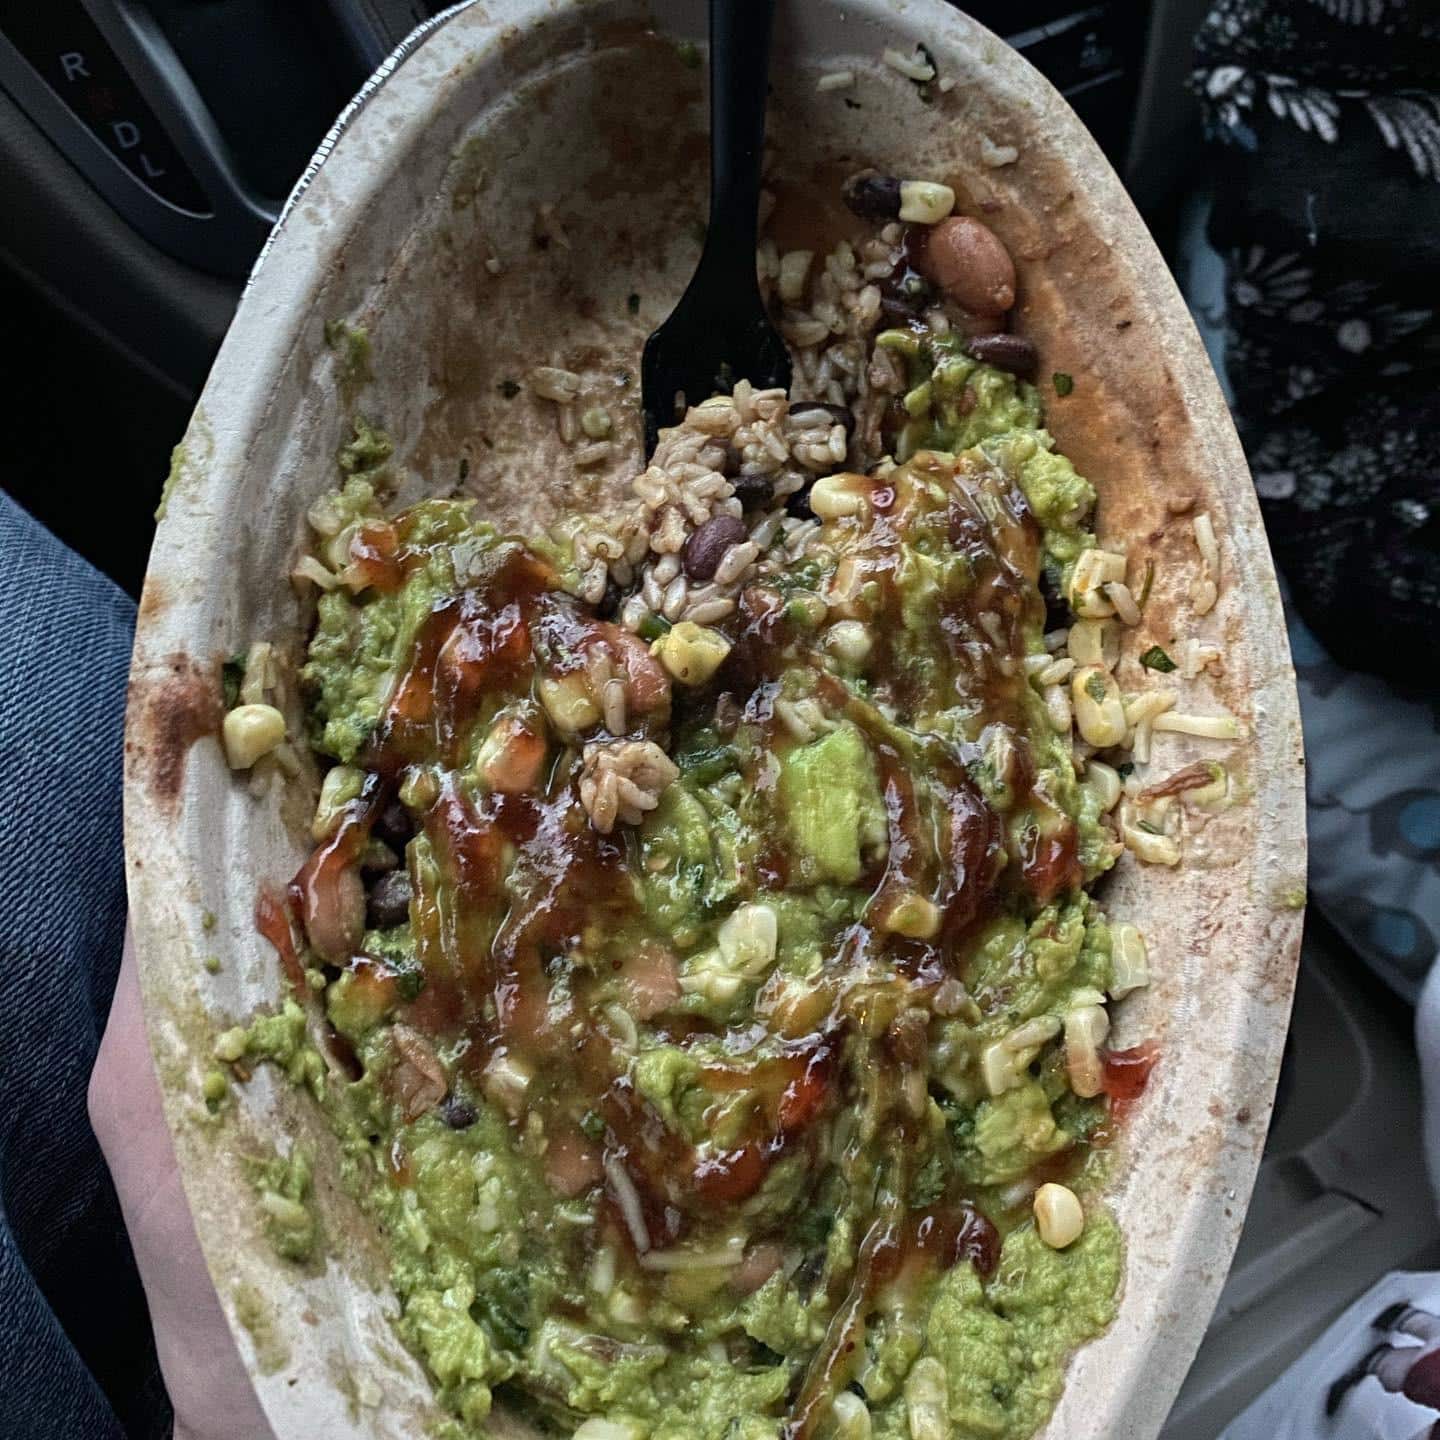 From FB: Chipotle burrito bowl with strawberry jelly added ...